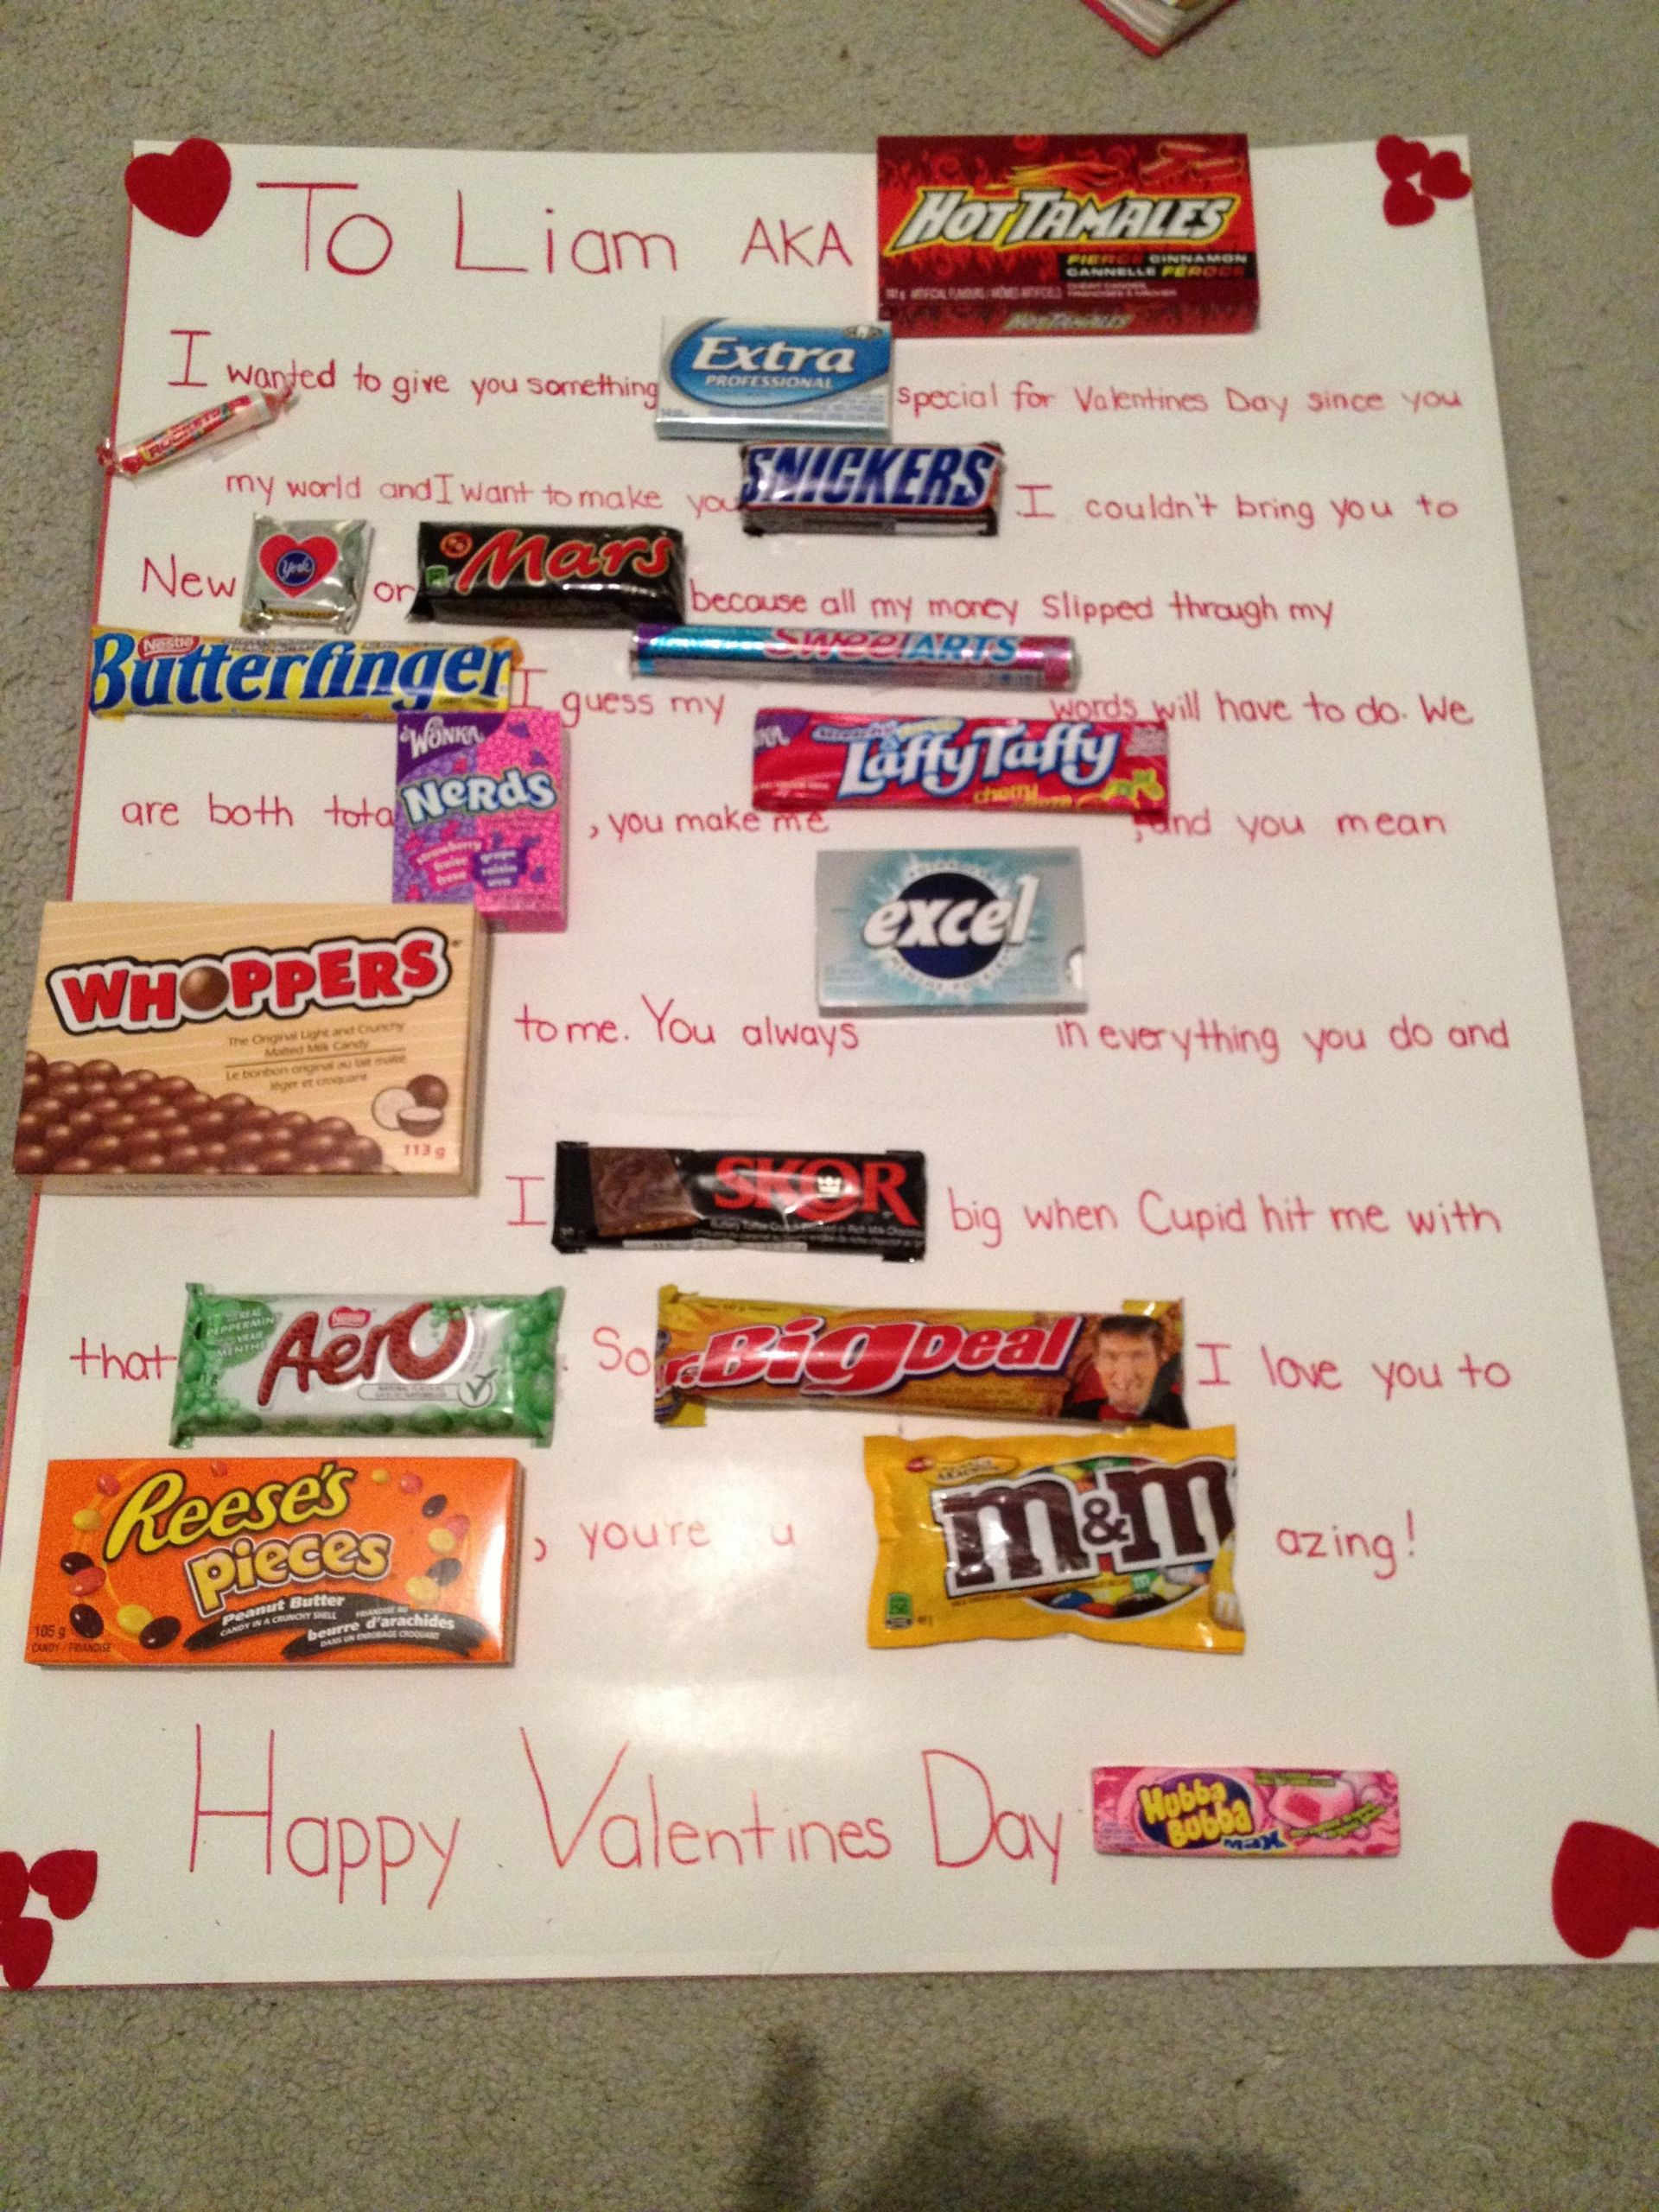 Valentines Day Card With Candy
 Valentines Day Candy Bar Card